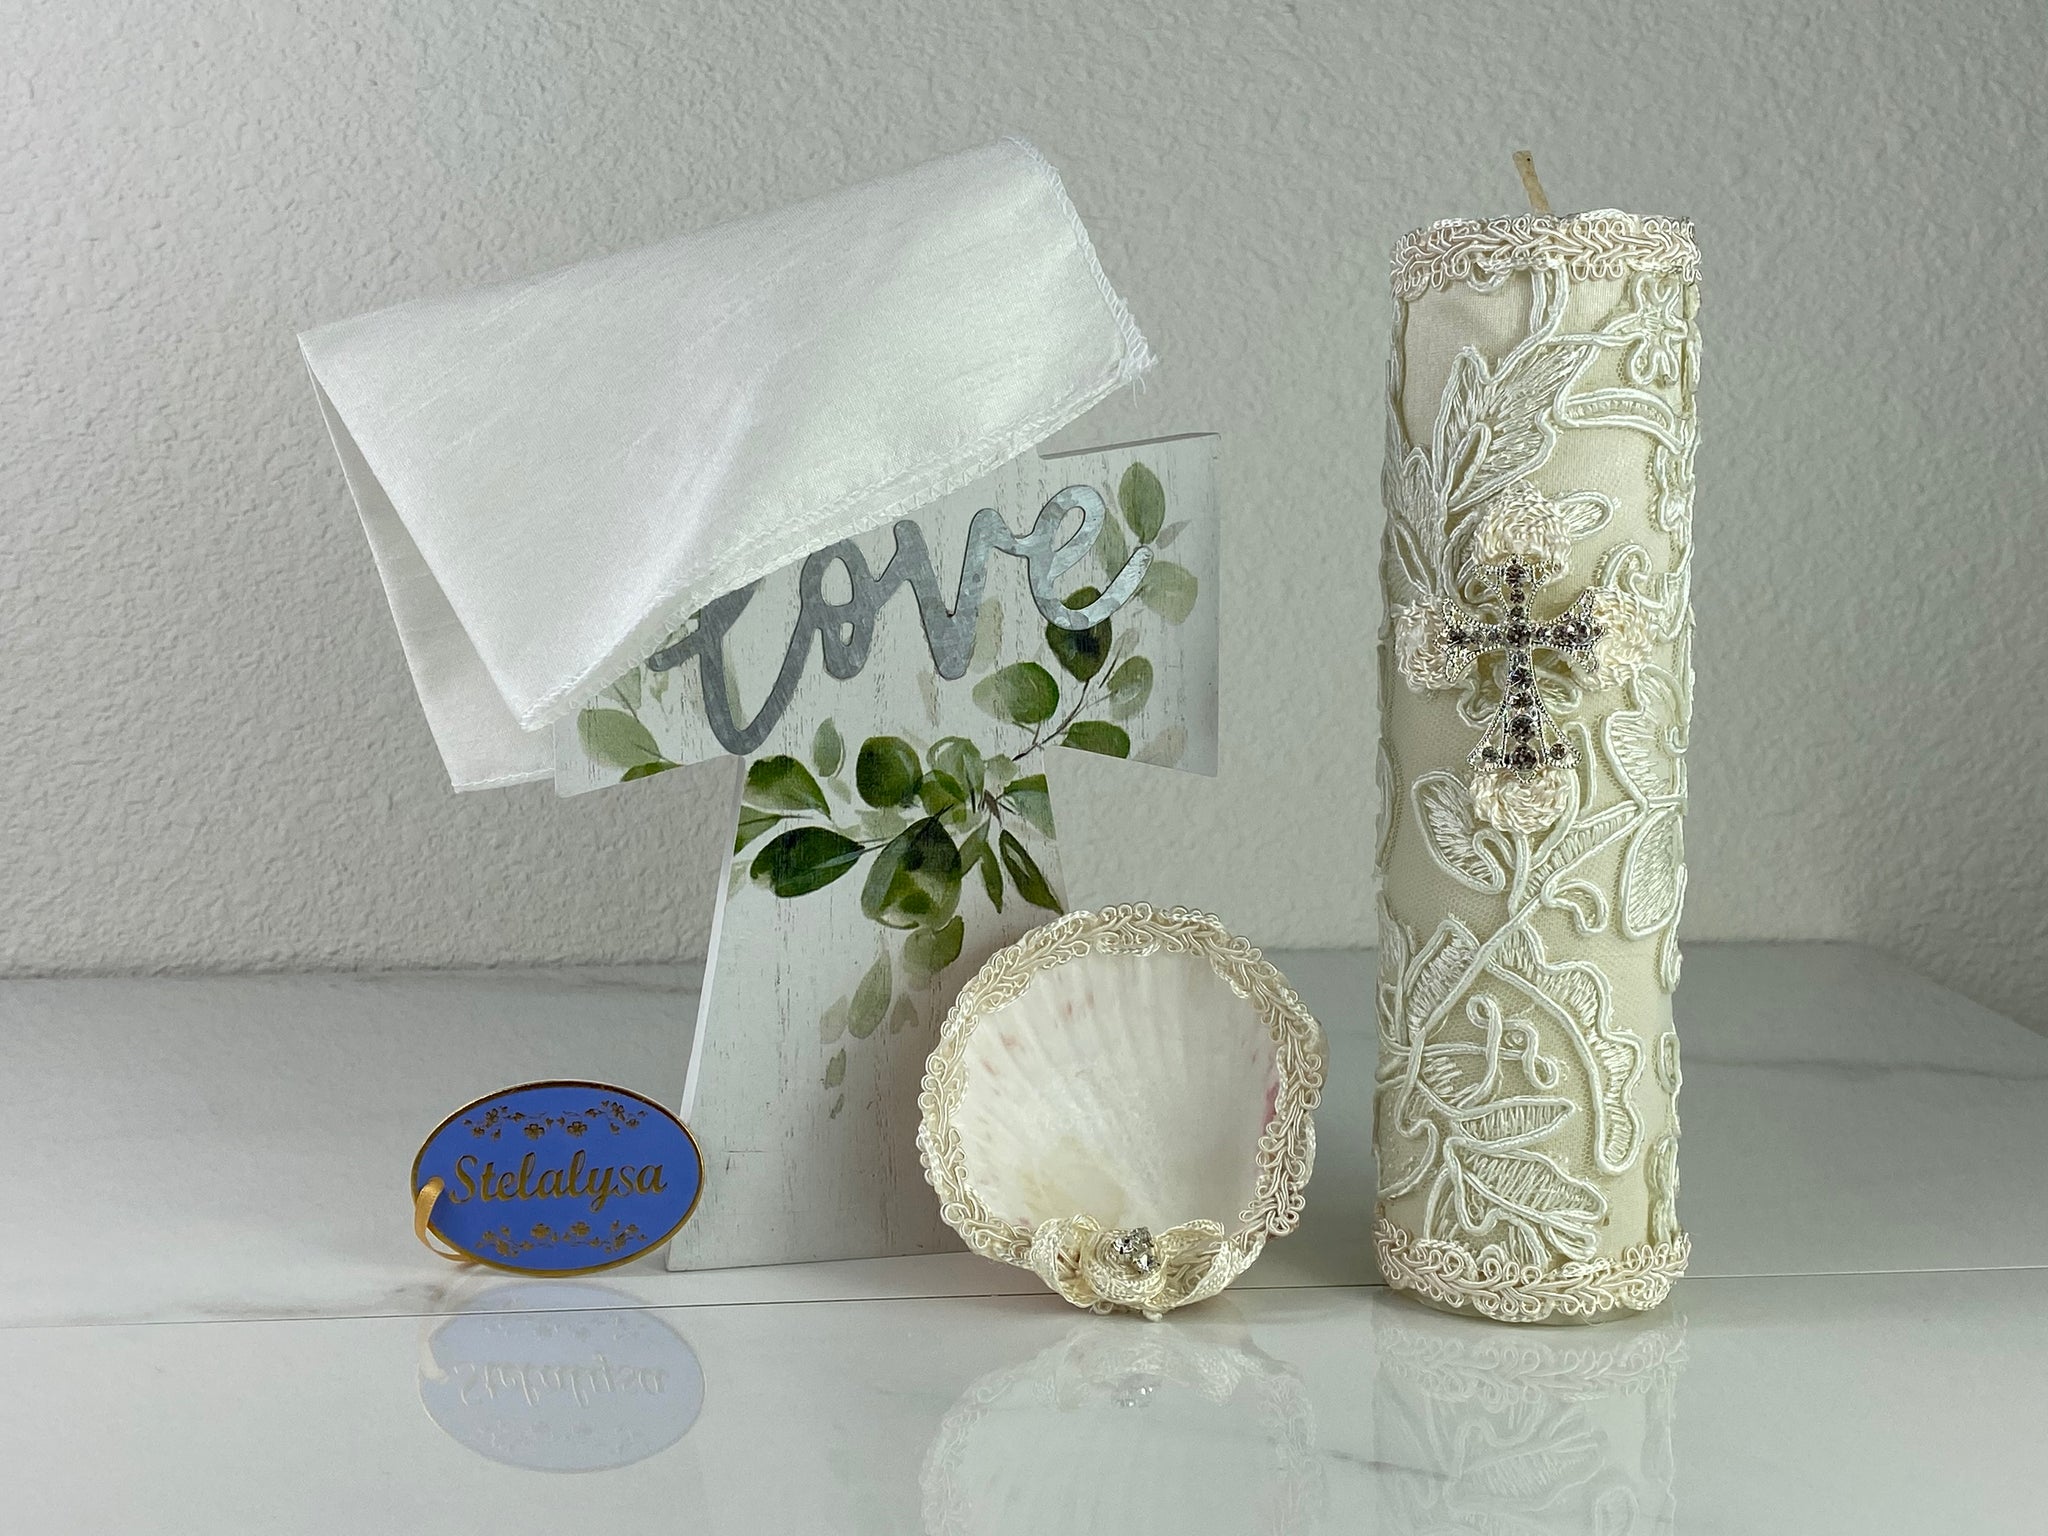 These one-of-a-kind Candle set is handmade and ivory in color.  This candle is beautifully wrapped in a unique lace design.   It is decorated with a cross made of rhinestones making it a gorgeous keepsake.   This candle is cylinder in shape.   To match, the Shell is put together piece by piece to compliment the Candle and Handkerchief.  The Handkerchief is made of satin and embroidered lace to match the Shell and Candle beautifully.  